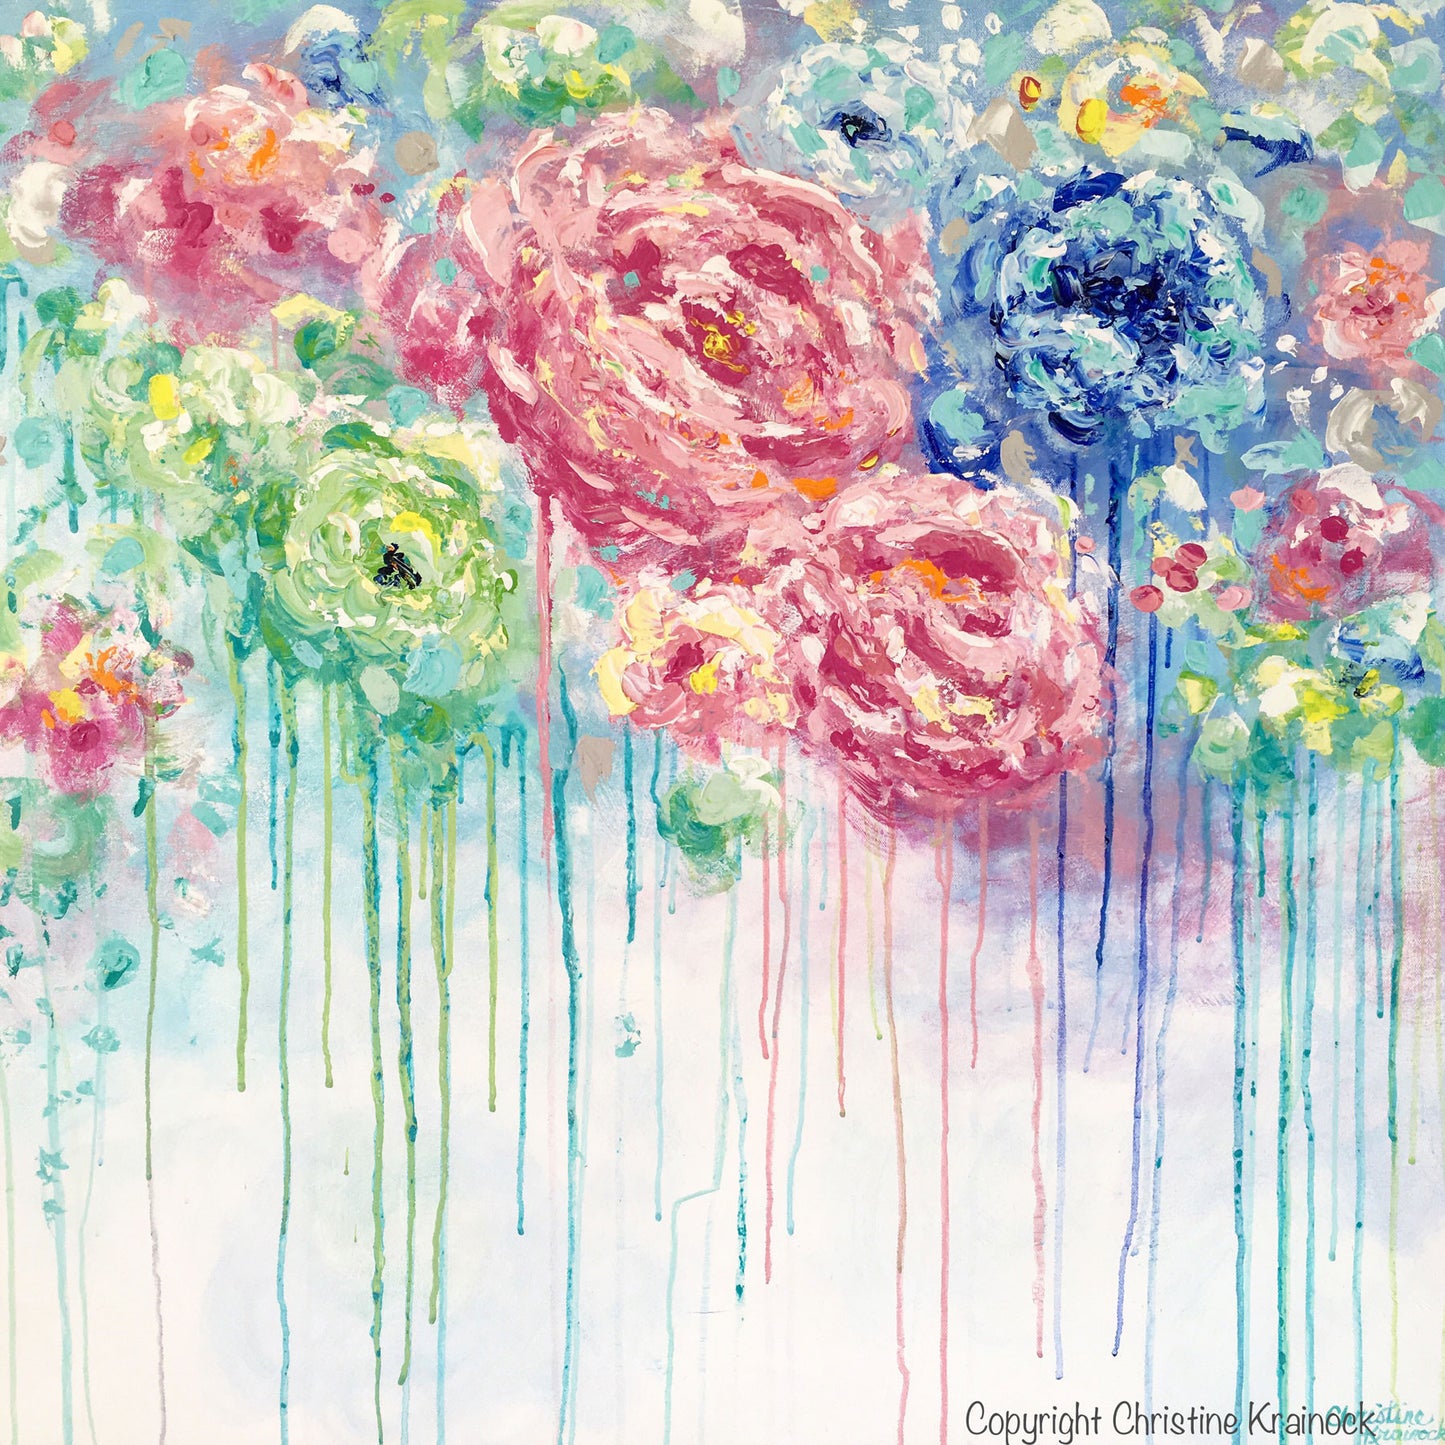 ORIGINAL Art Abstract Painting Flowers Blue White Pink Floral Textured XL Wall Art Colorful Peonies - Christine Krainock Art - Contemporary Art by Christine - 6